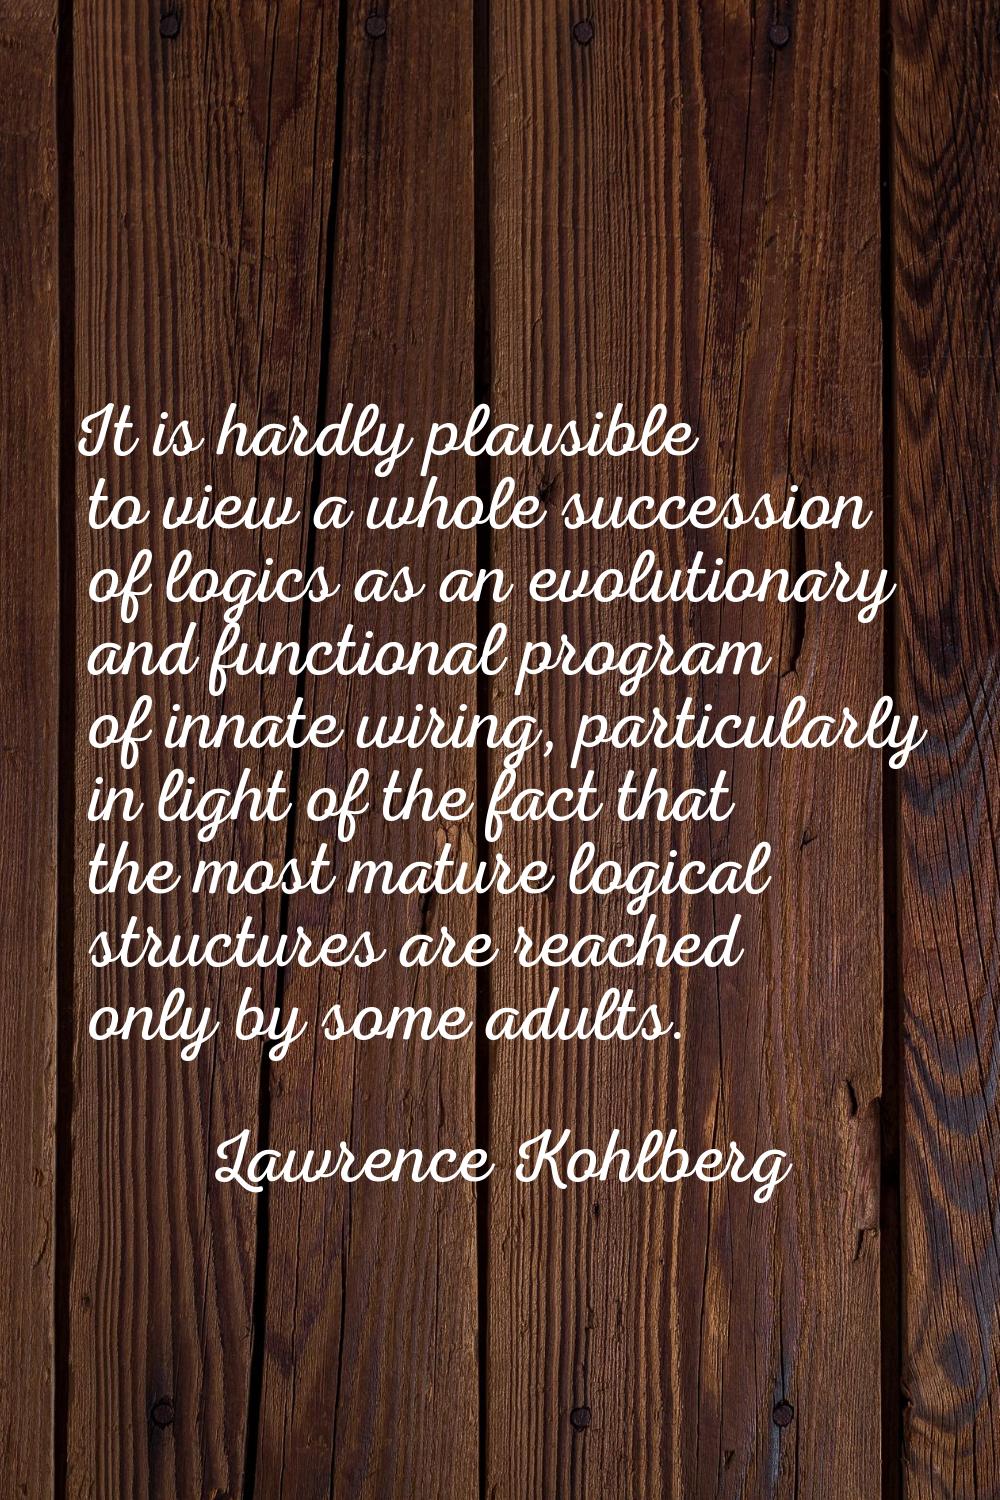 It is hardly plausible to view a whole succession of logics as an evolutionary and functional progr